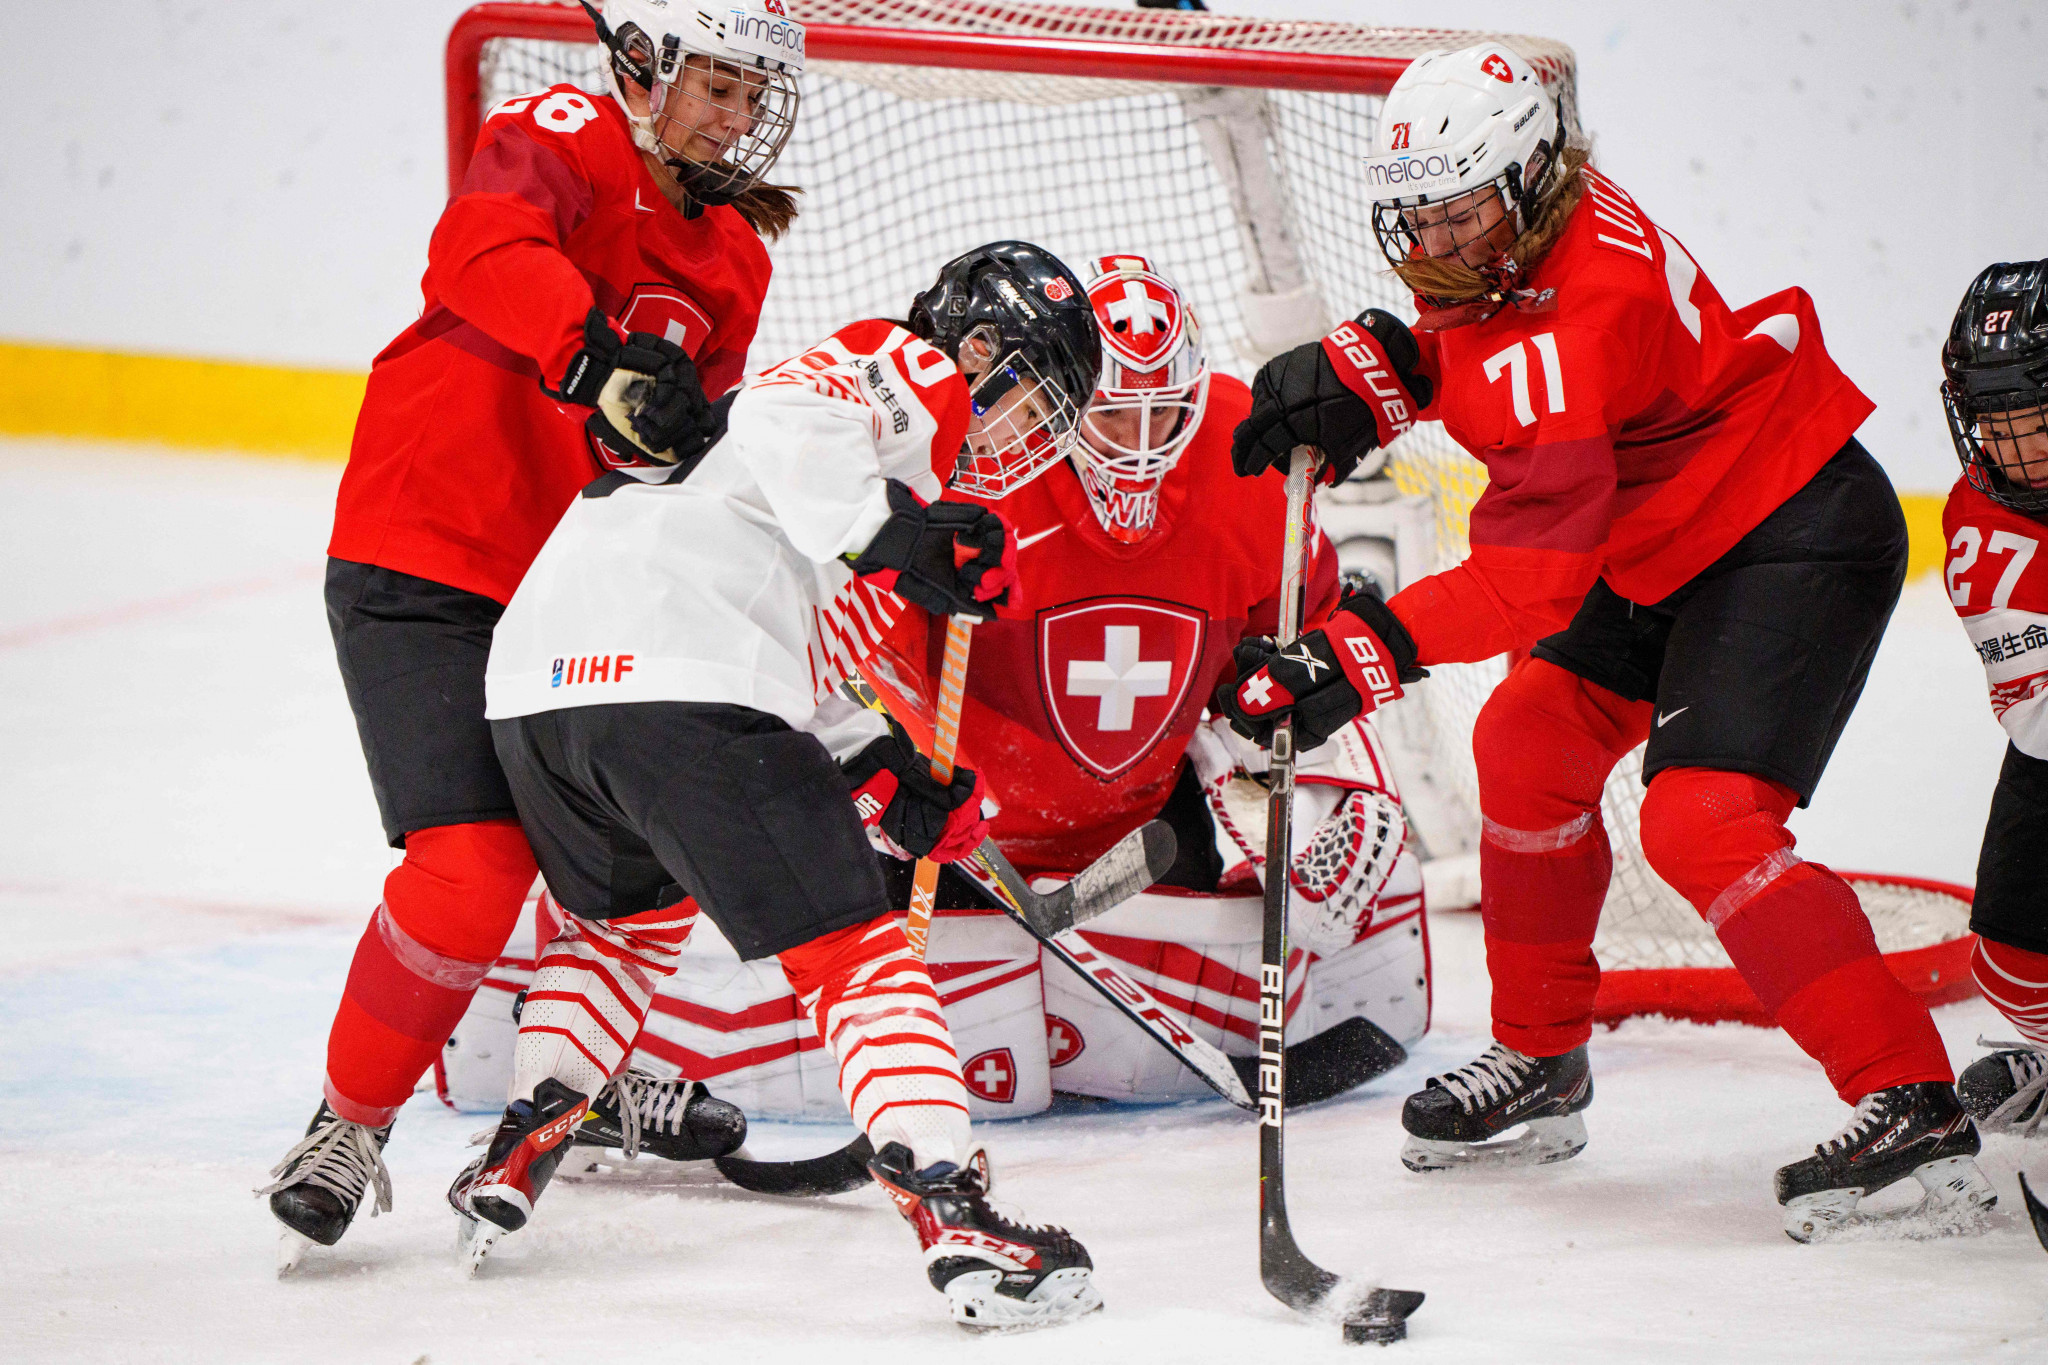 Switzerland beat Japan in a shootout to reach the Women's World Ice Hockey Championship semi-finals ©Getty Images